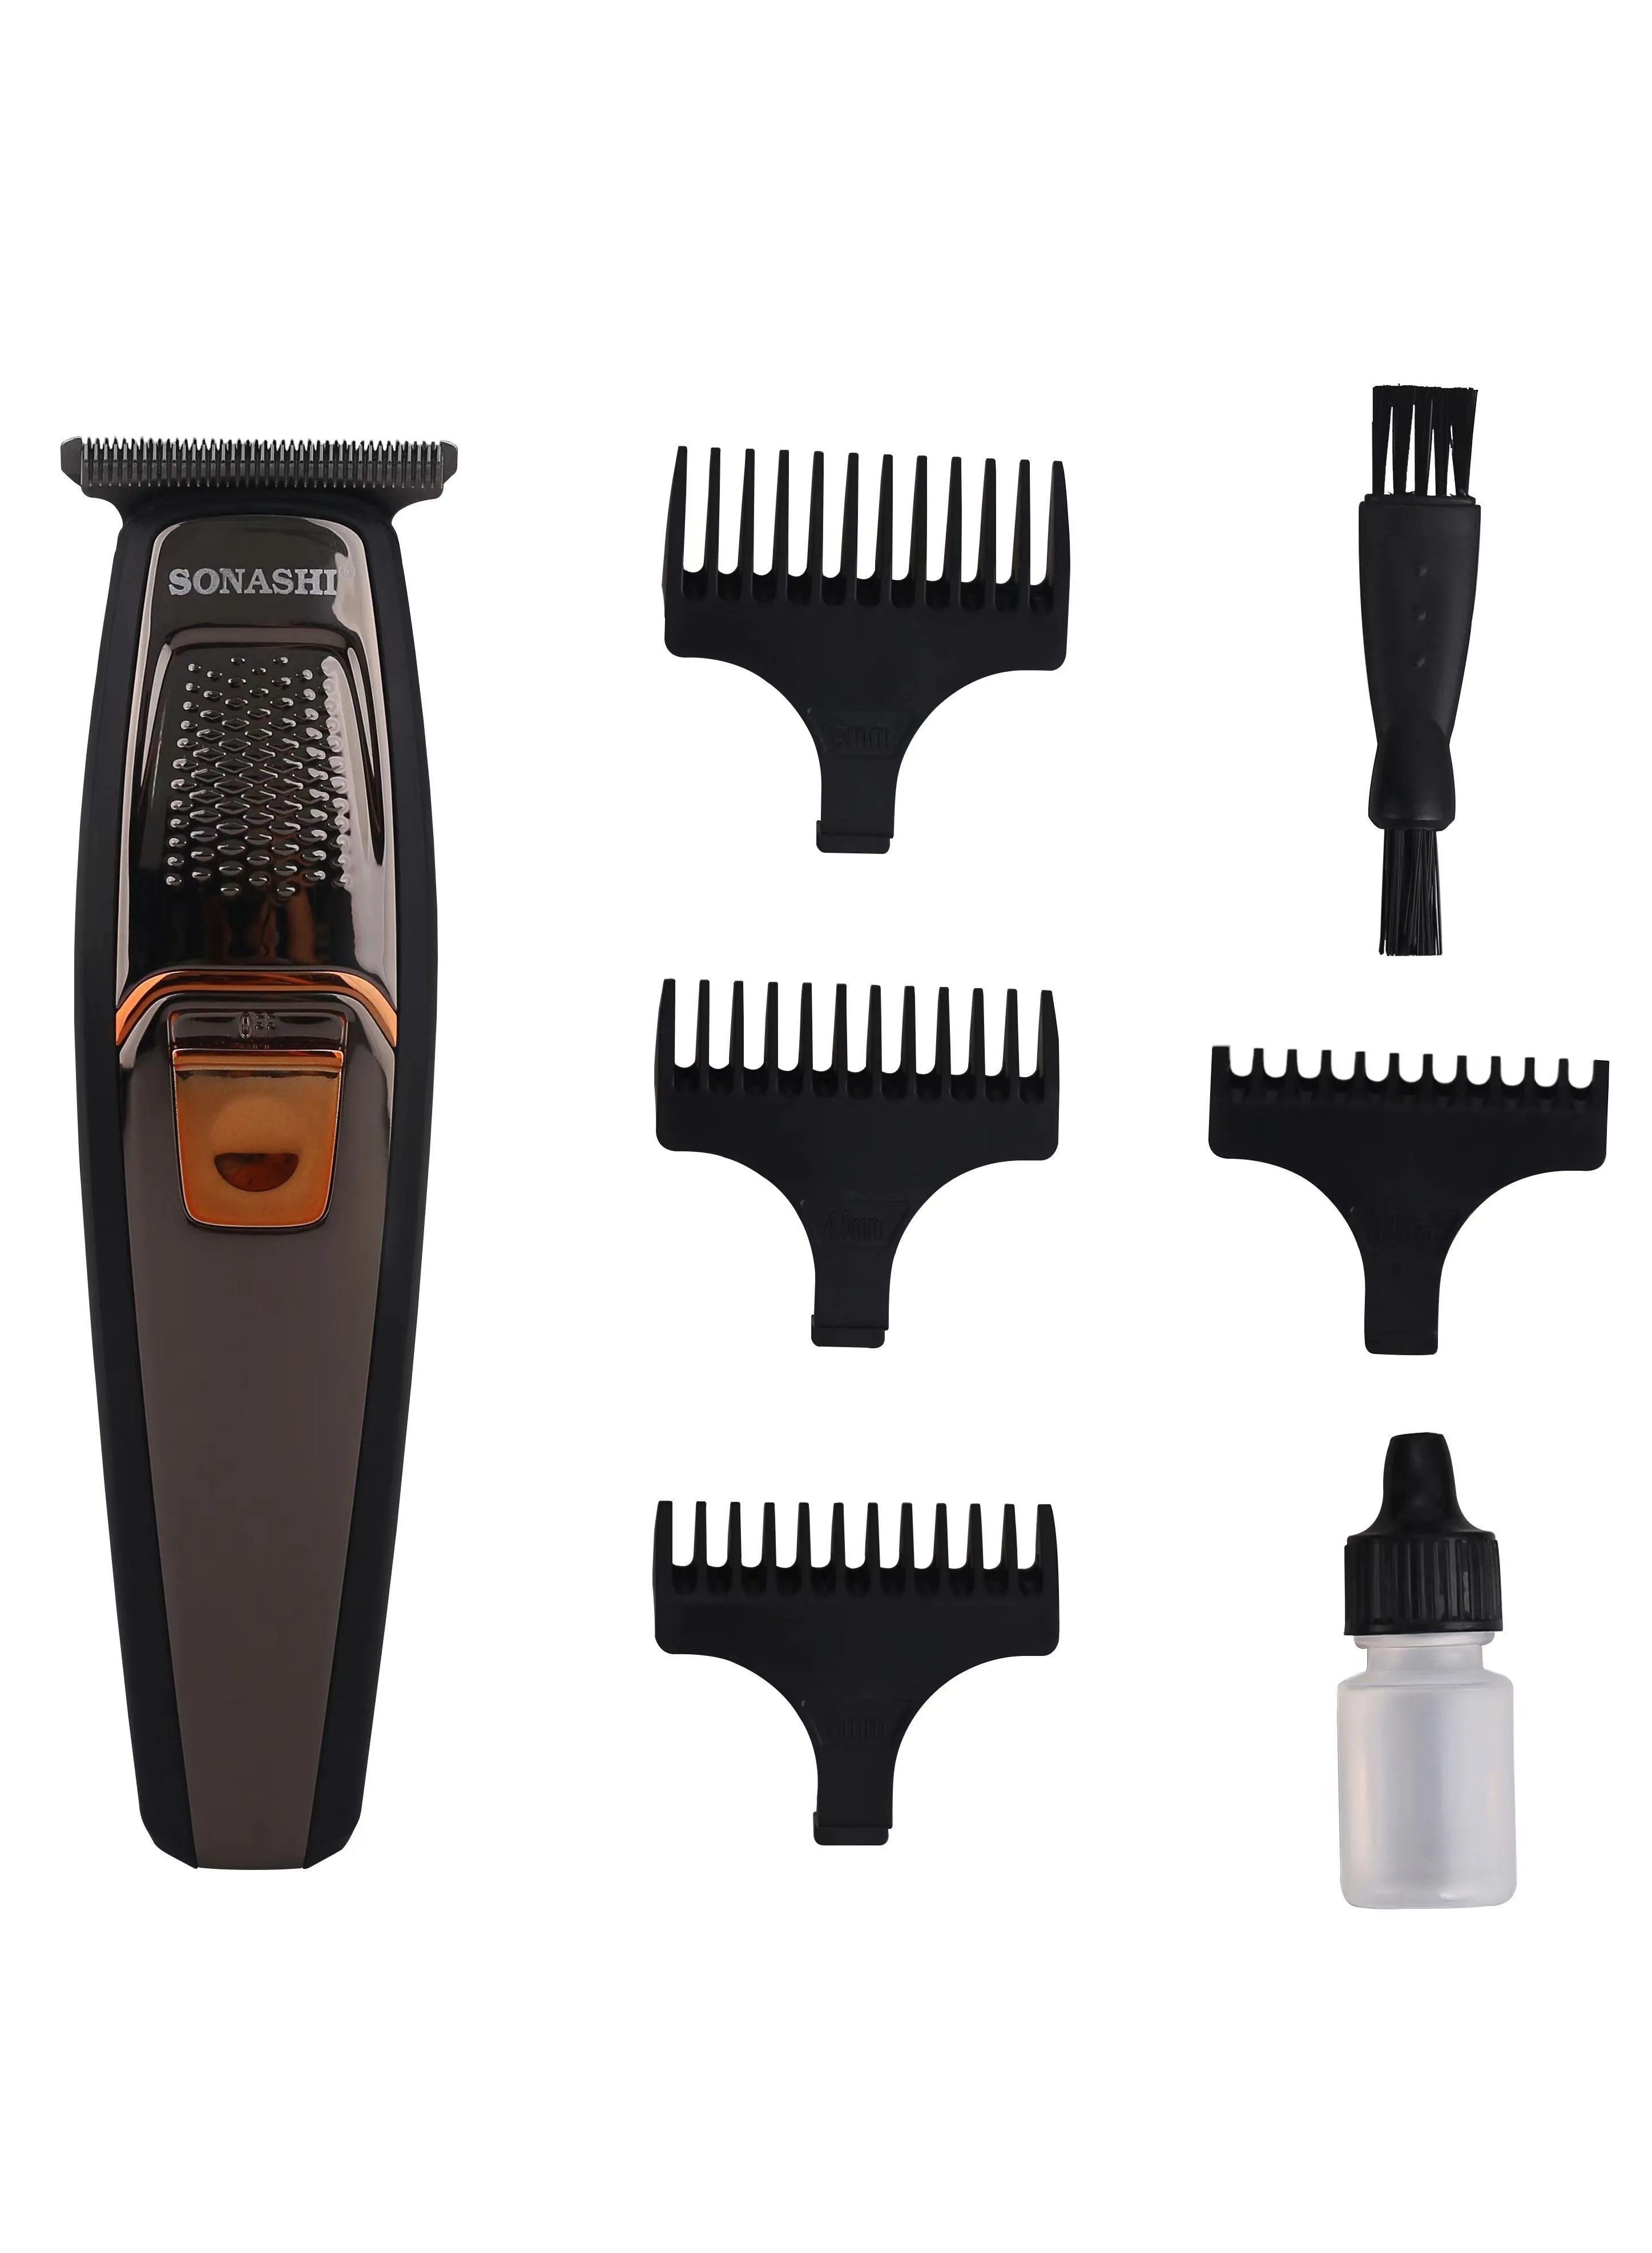 SONASHI Professional Rechargeable Hair Trimmer/Clipper With LCD Digital Display For Men SHC-1044N